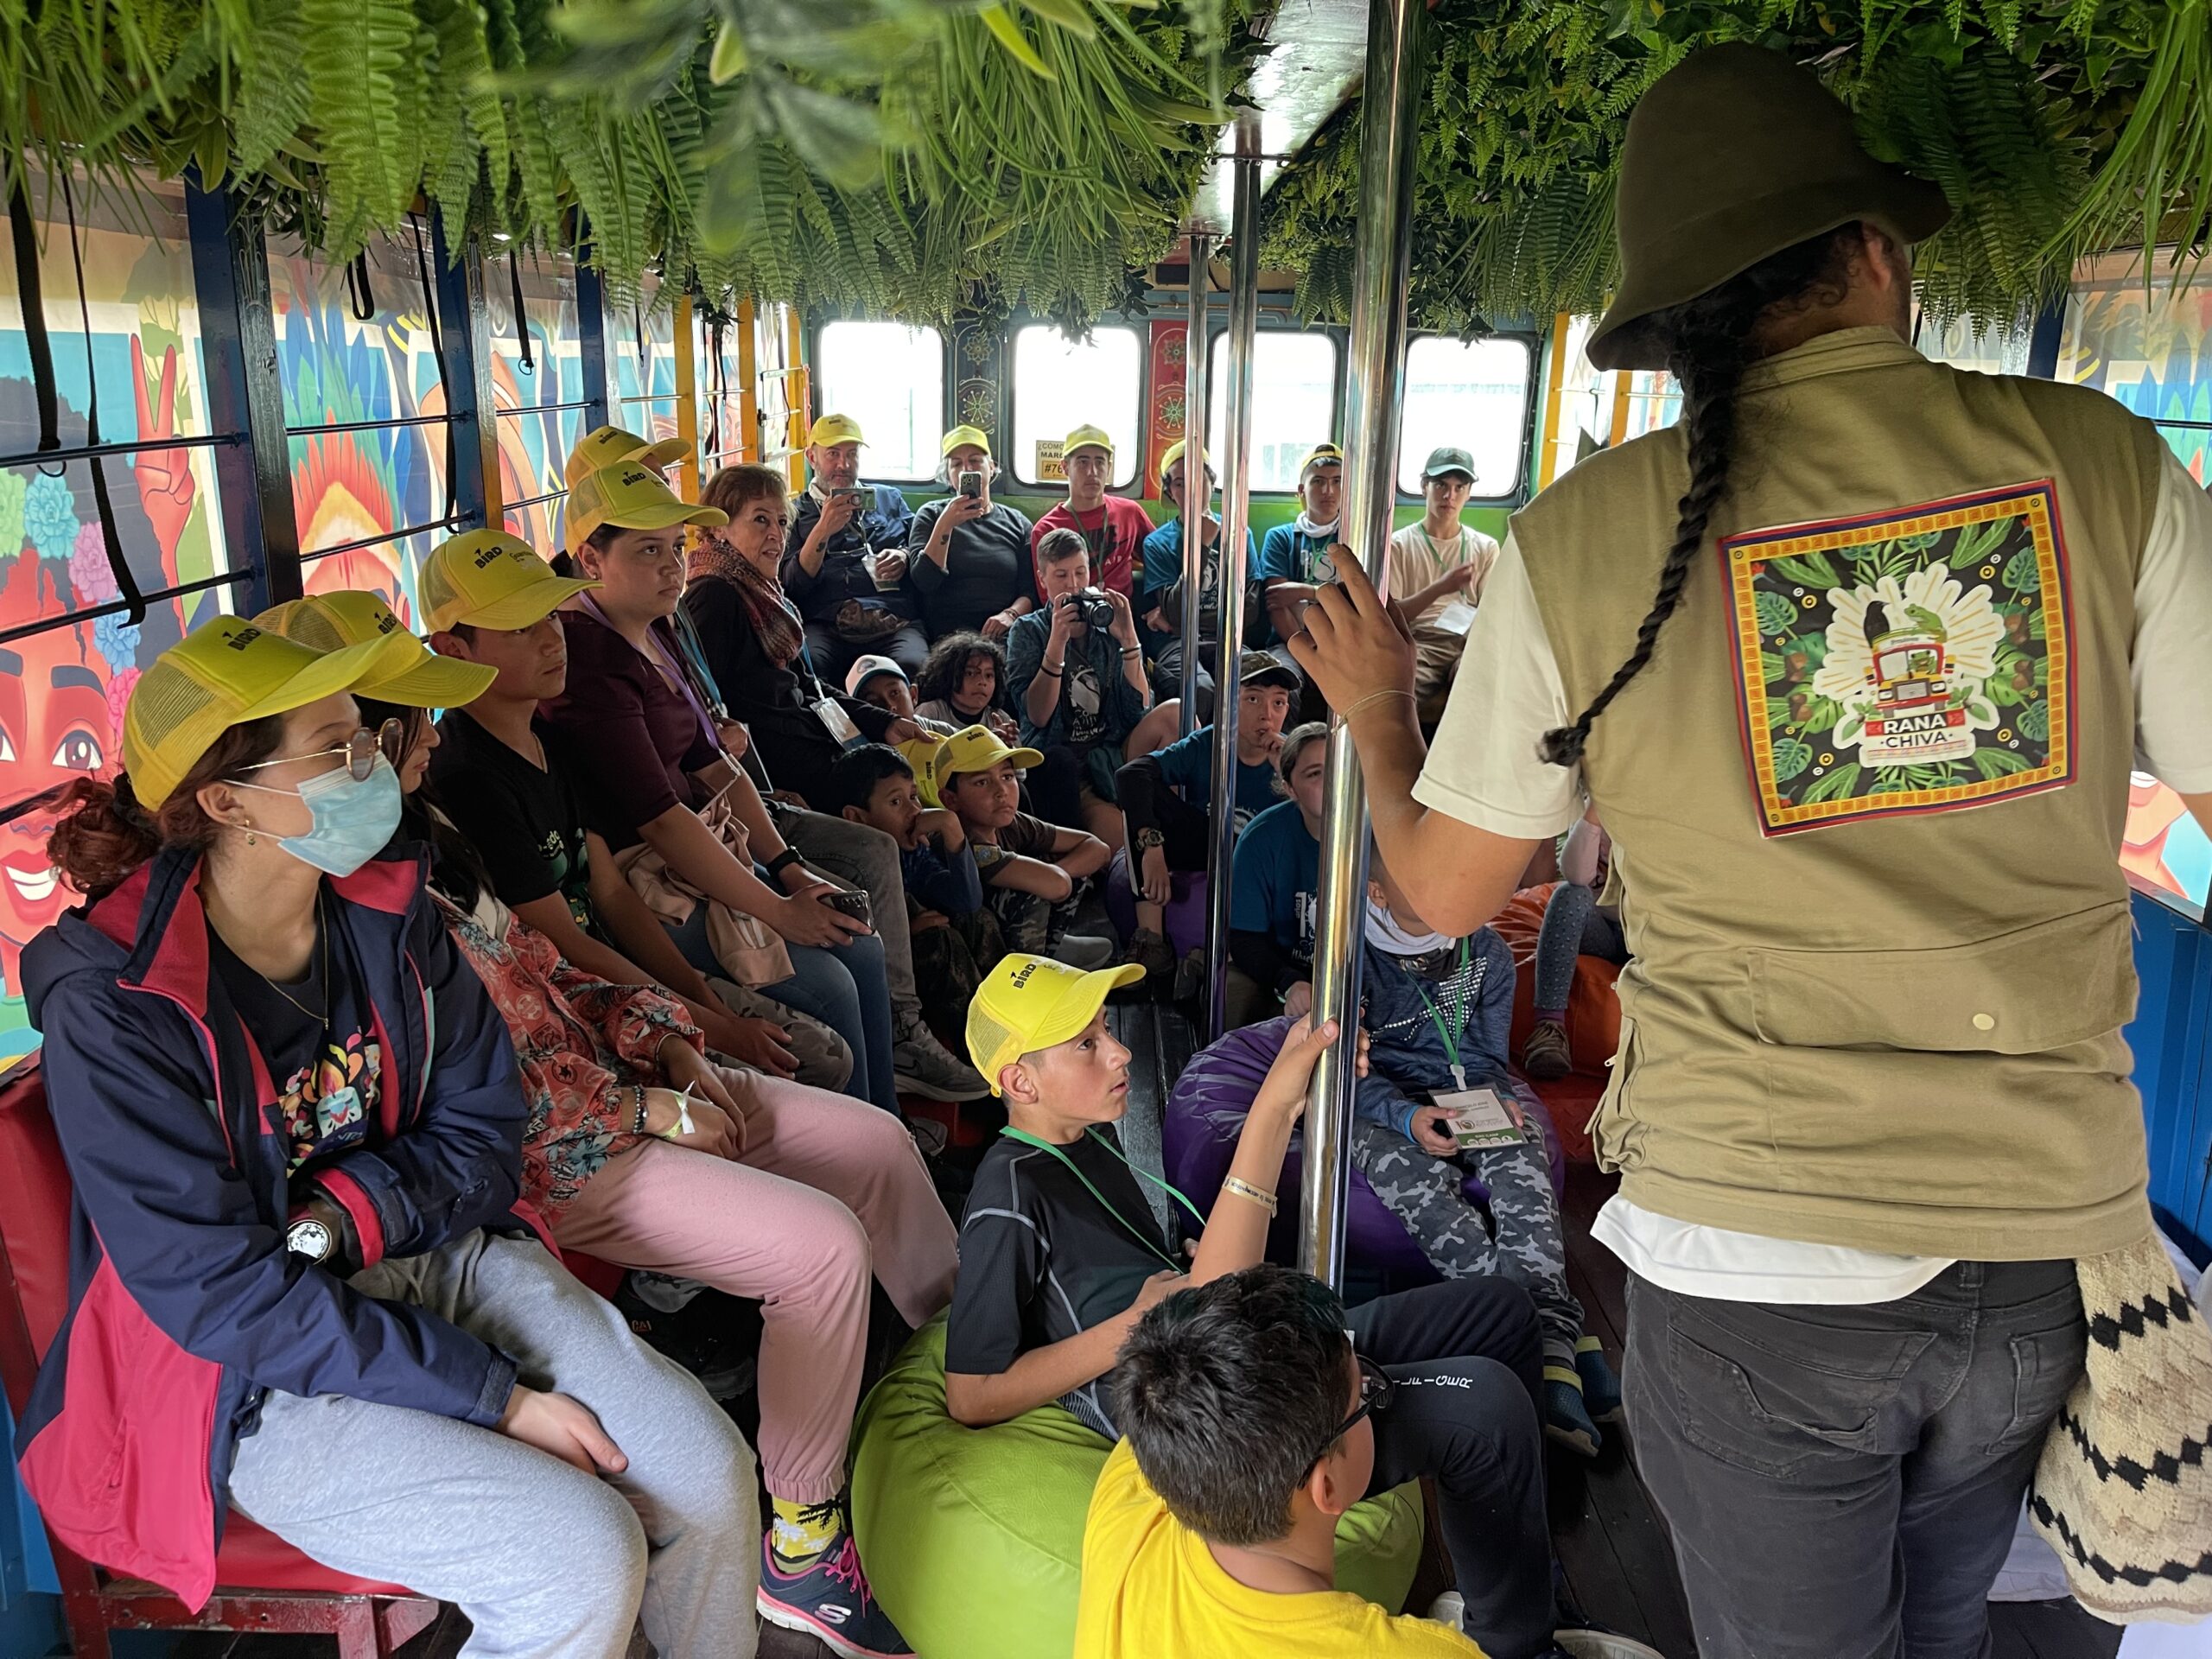 Rana Chiva–  Mobil Environmental Education Classroom traveling to rural schools in Colombia